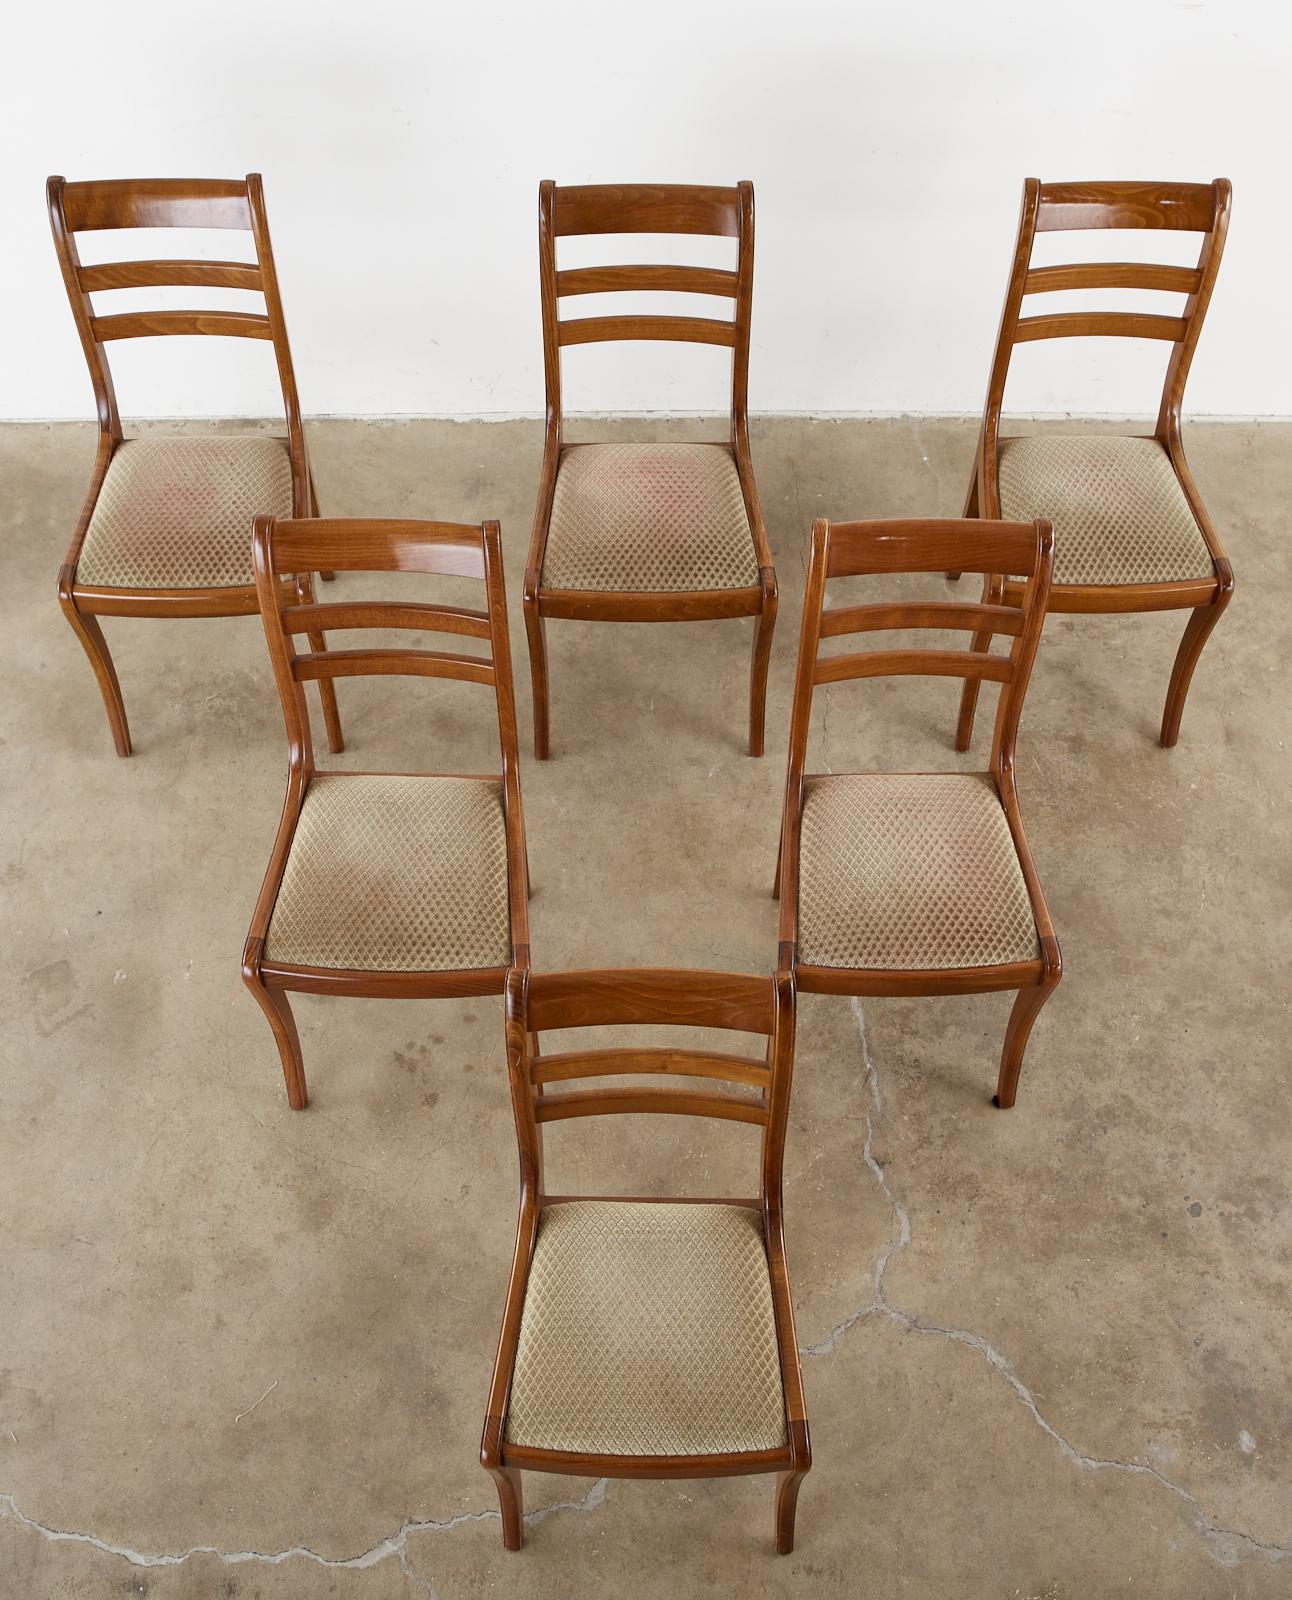 Hand-Crafted Set of Six English Regency Style Dining Chairs